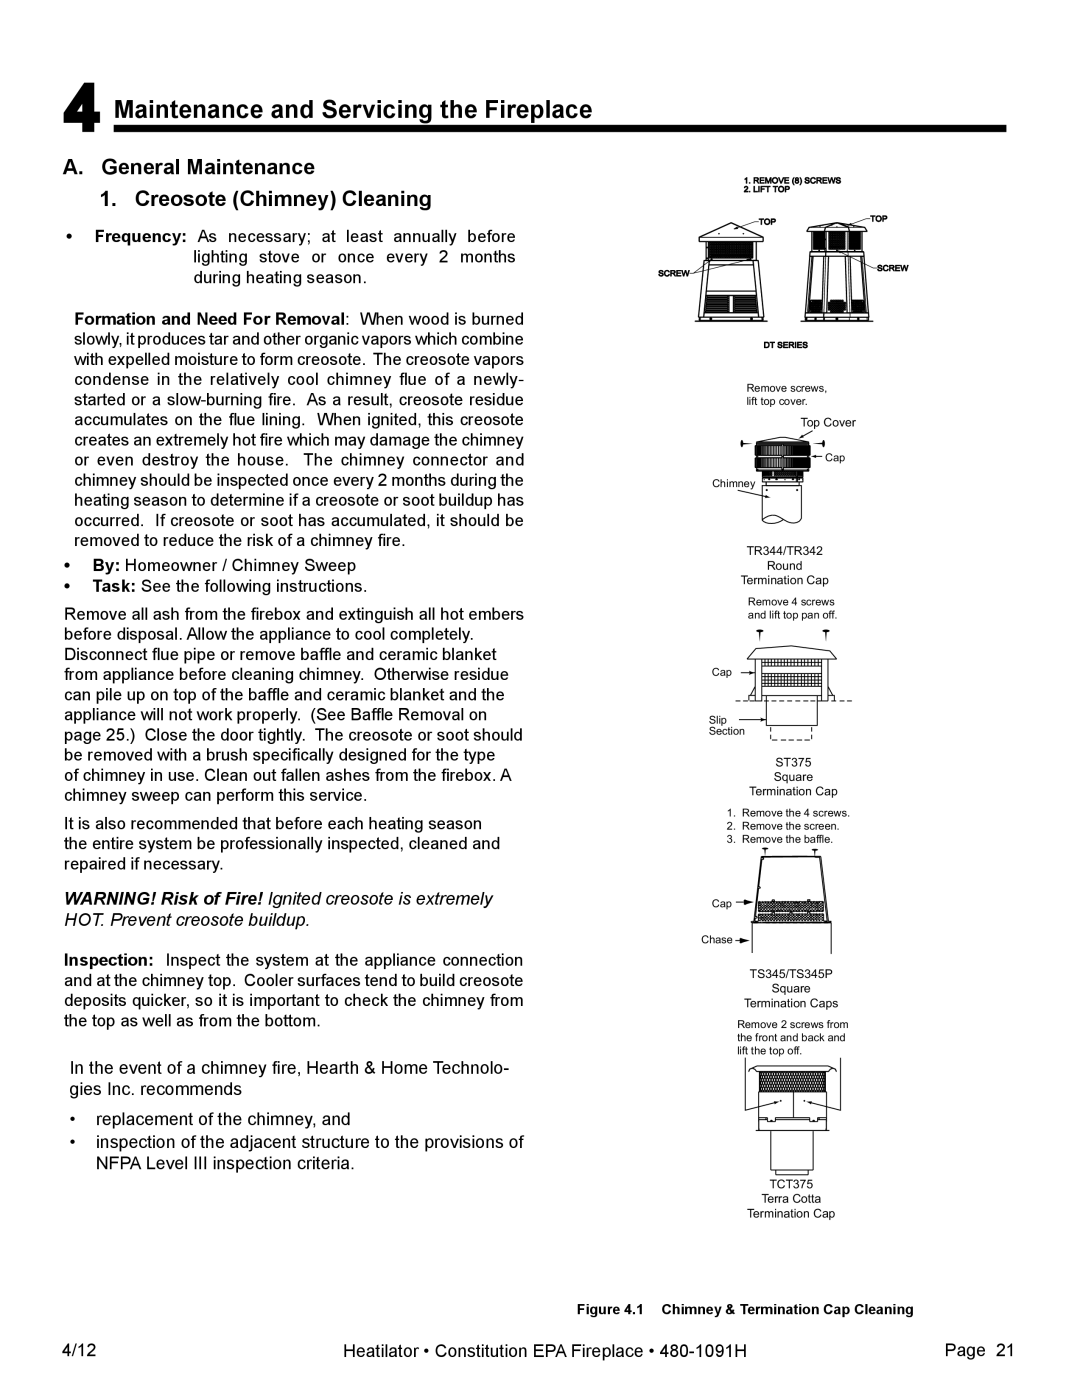 Heatiator C40 owner manual 4Maintenance and Servicing the Fireplace, A.General Maintenance 1.Creosote Chimney Cleaning 